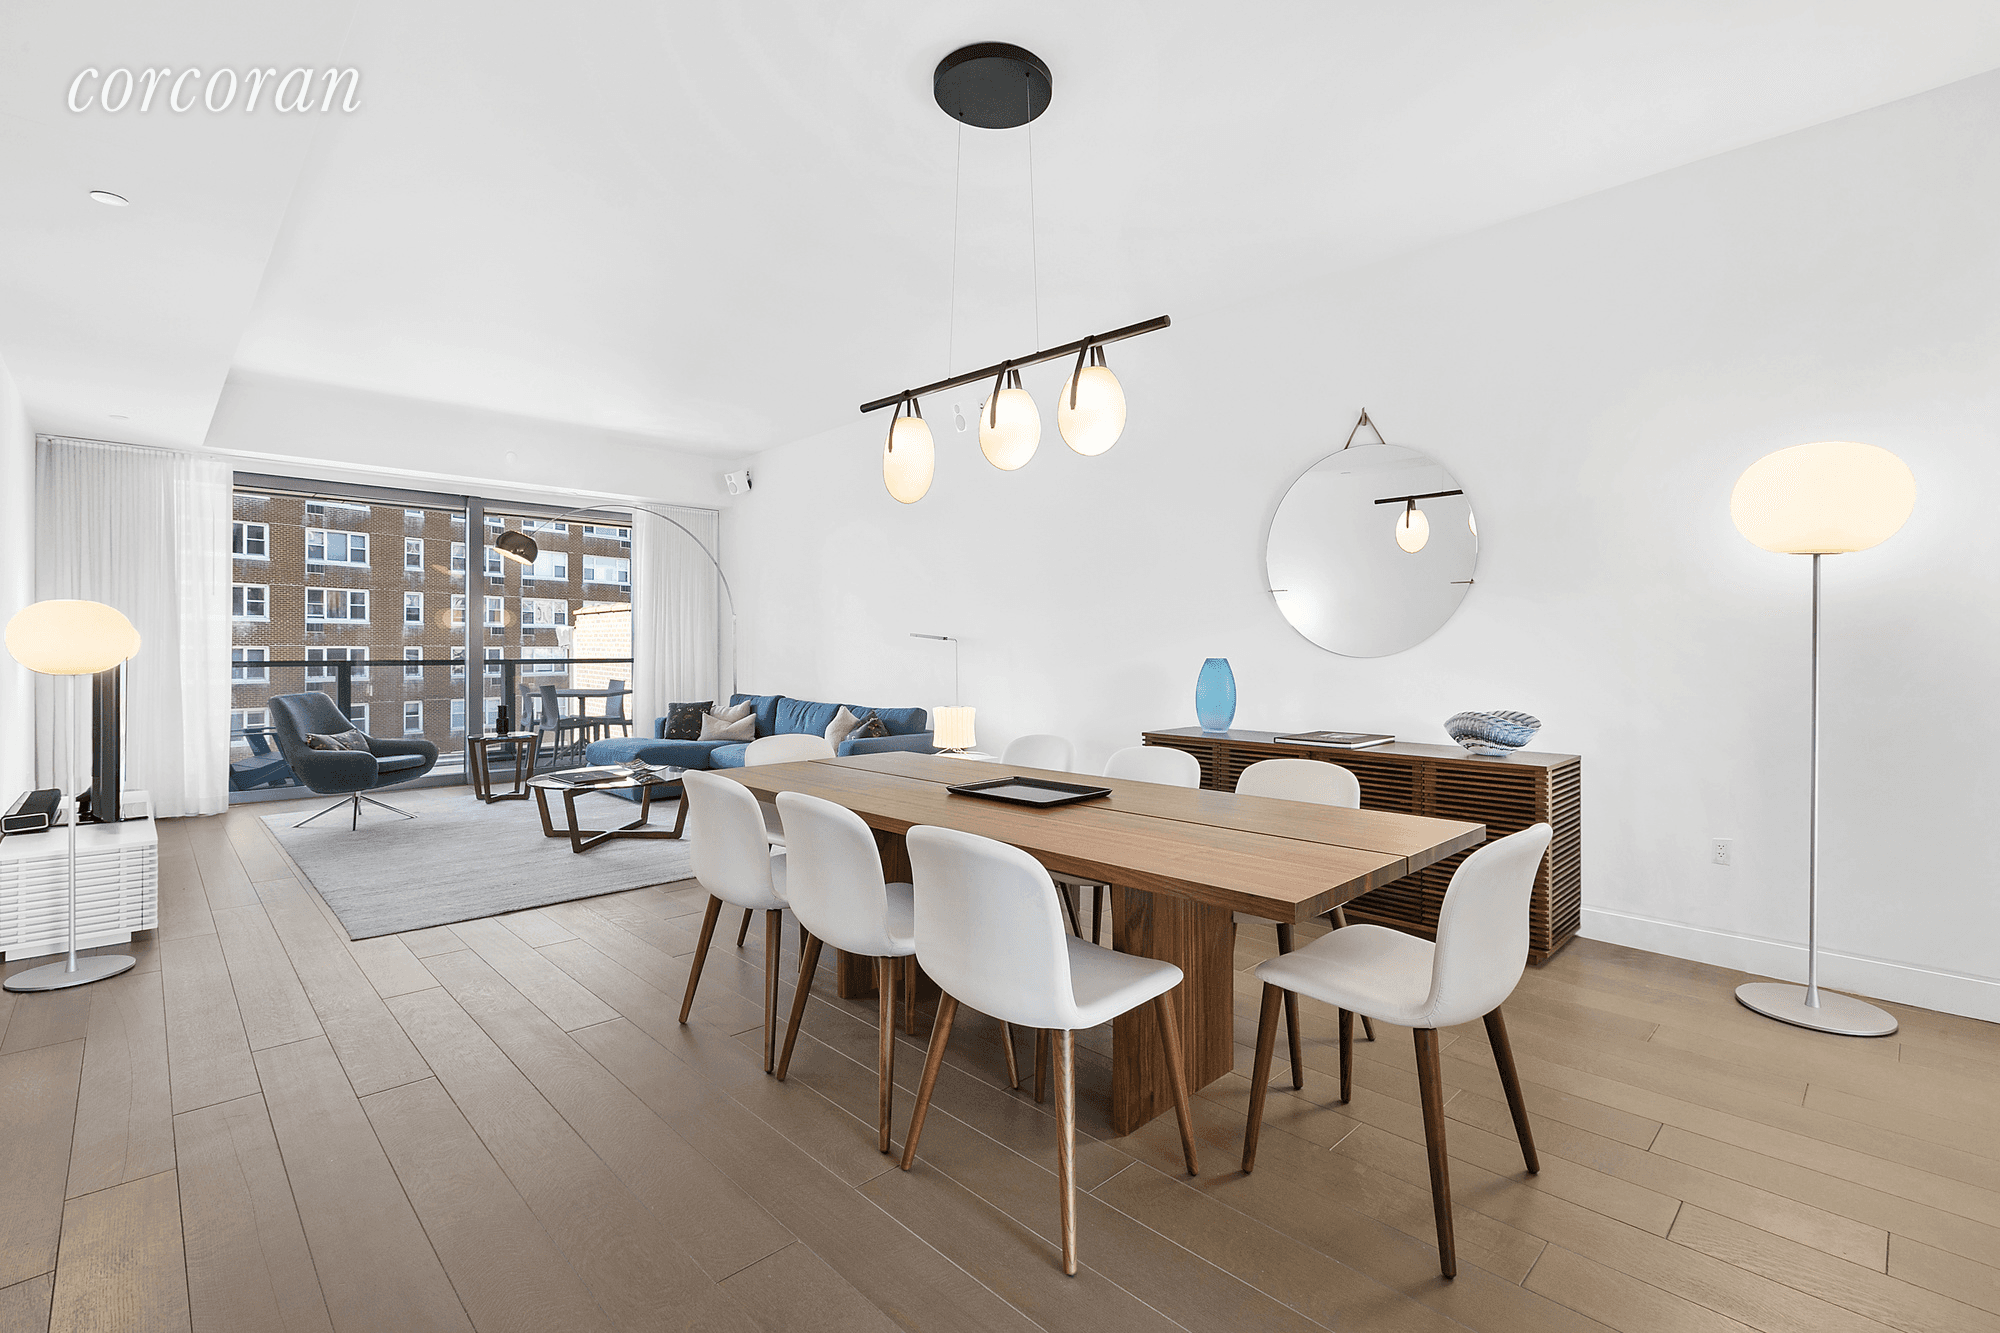 This stunning loft features expansive windows throughout with striking vistas to the East over Soho and West across Vandam Street.